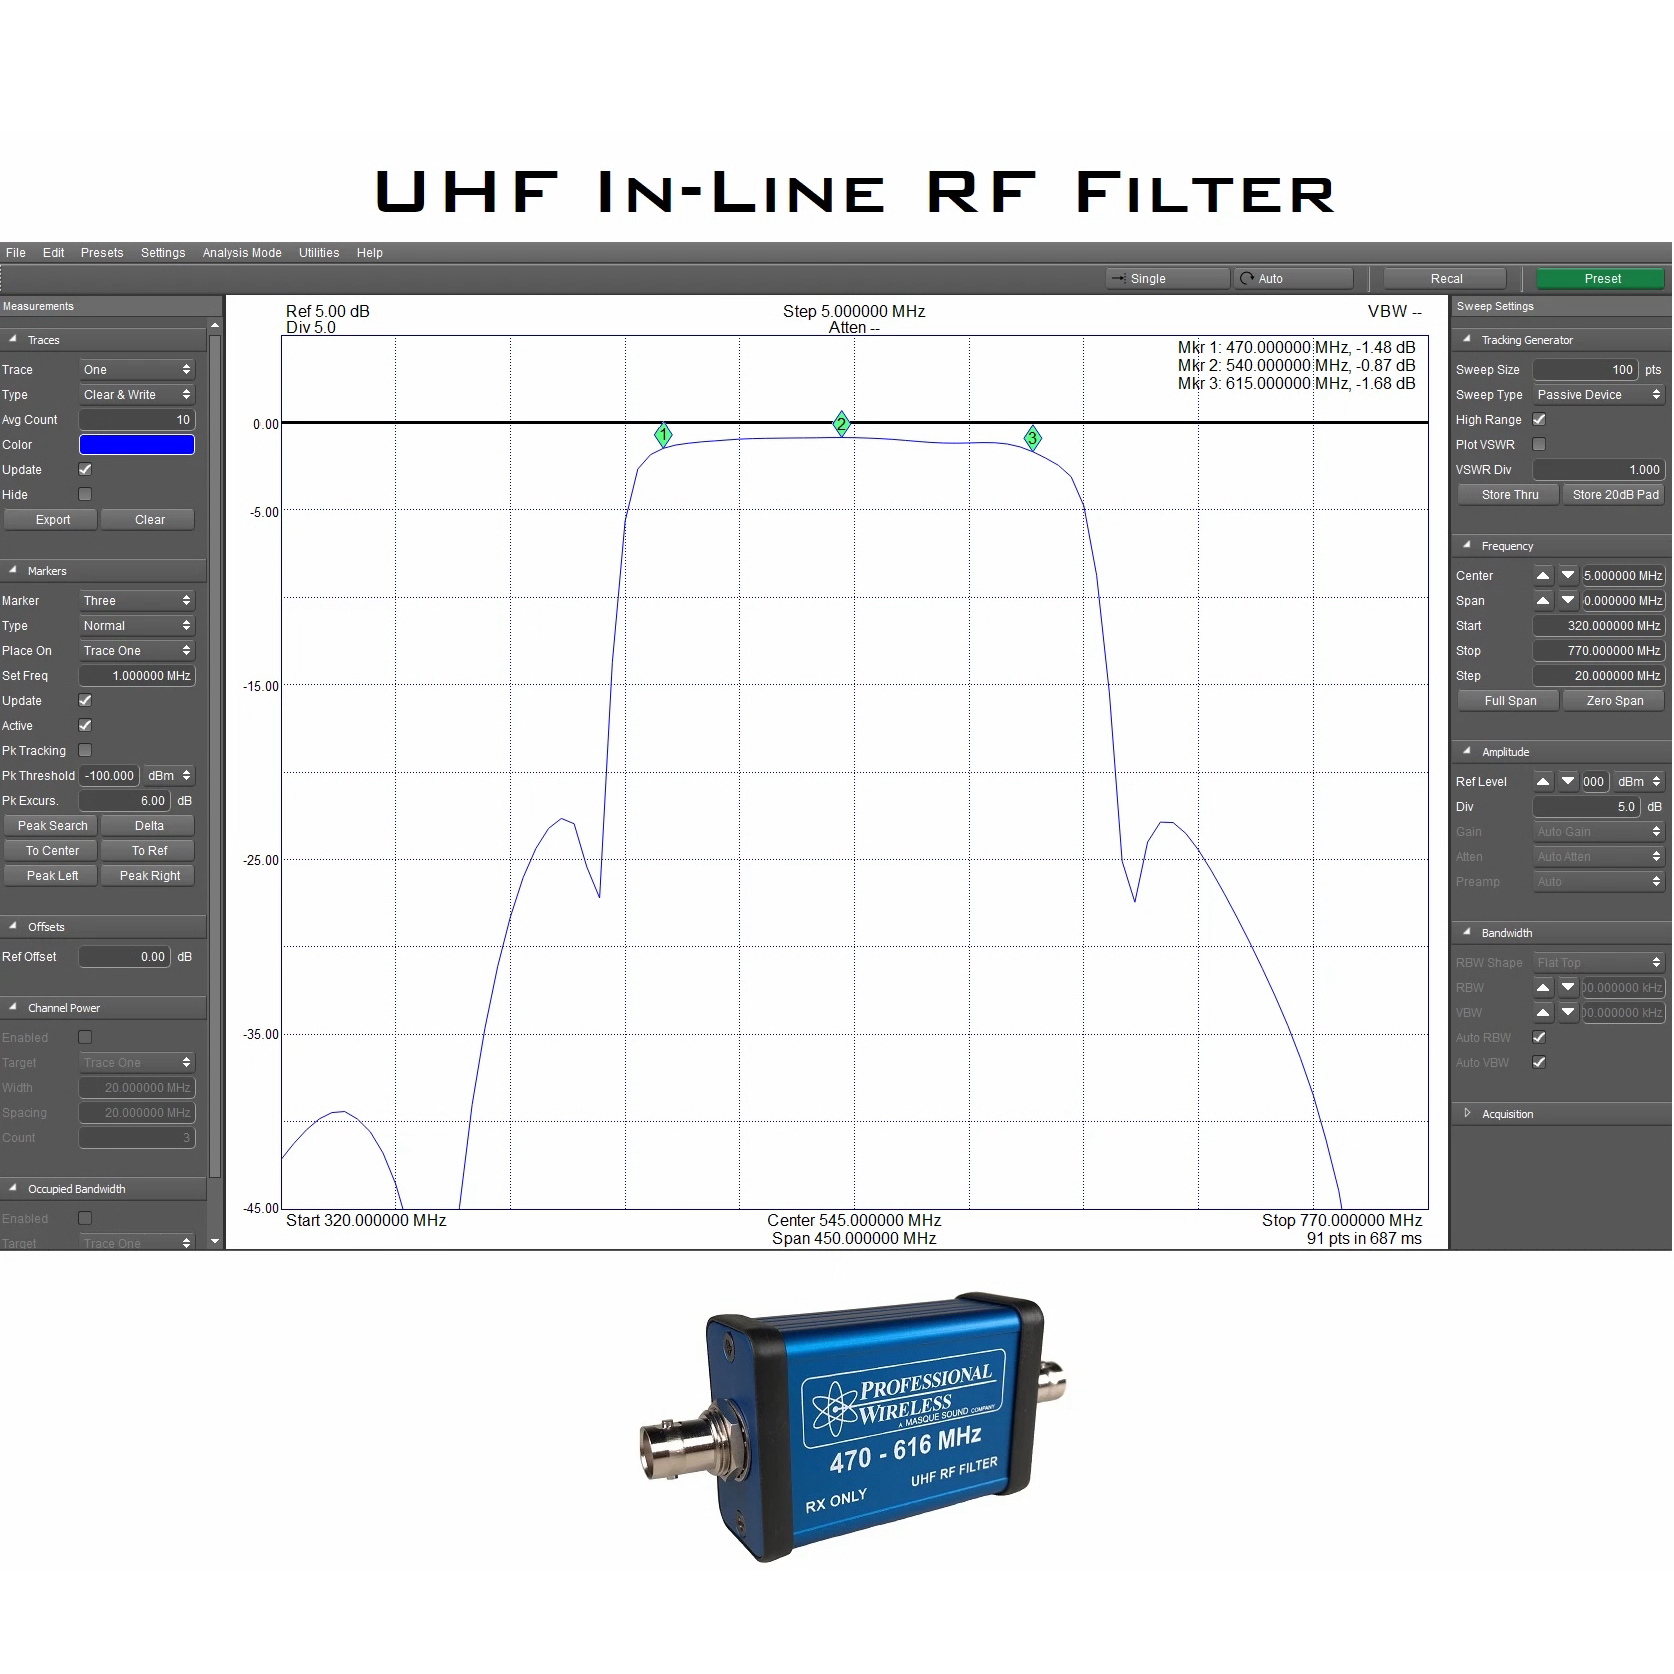 vasthoudend Fonkeling zuiger PWS In-Line Bandpass Filter - UHF 470-616 MHz - Professional Wireless  Systems